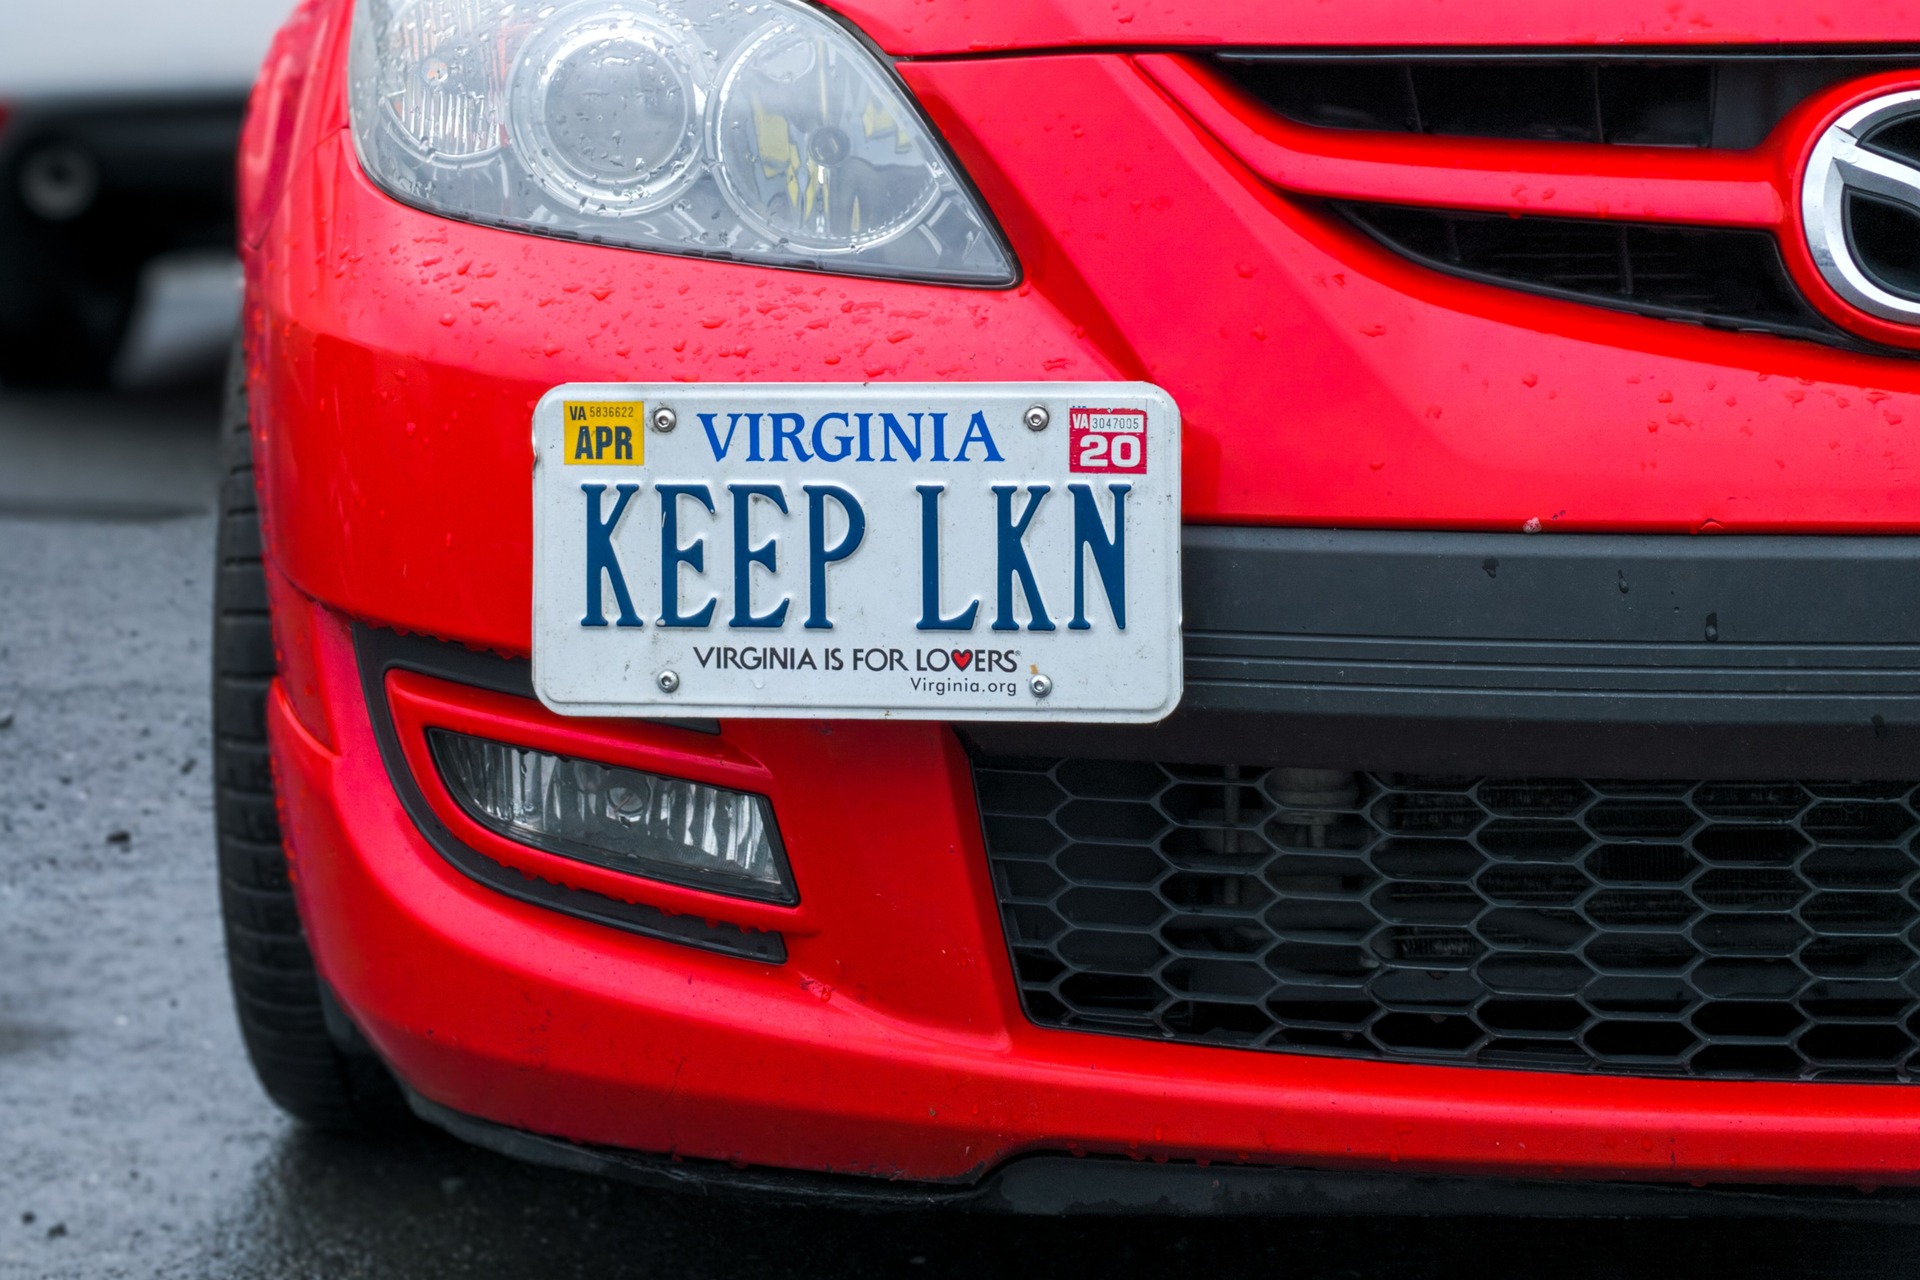 a personalized license plate saying "KEEP LKN"